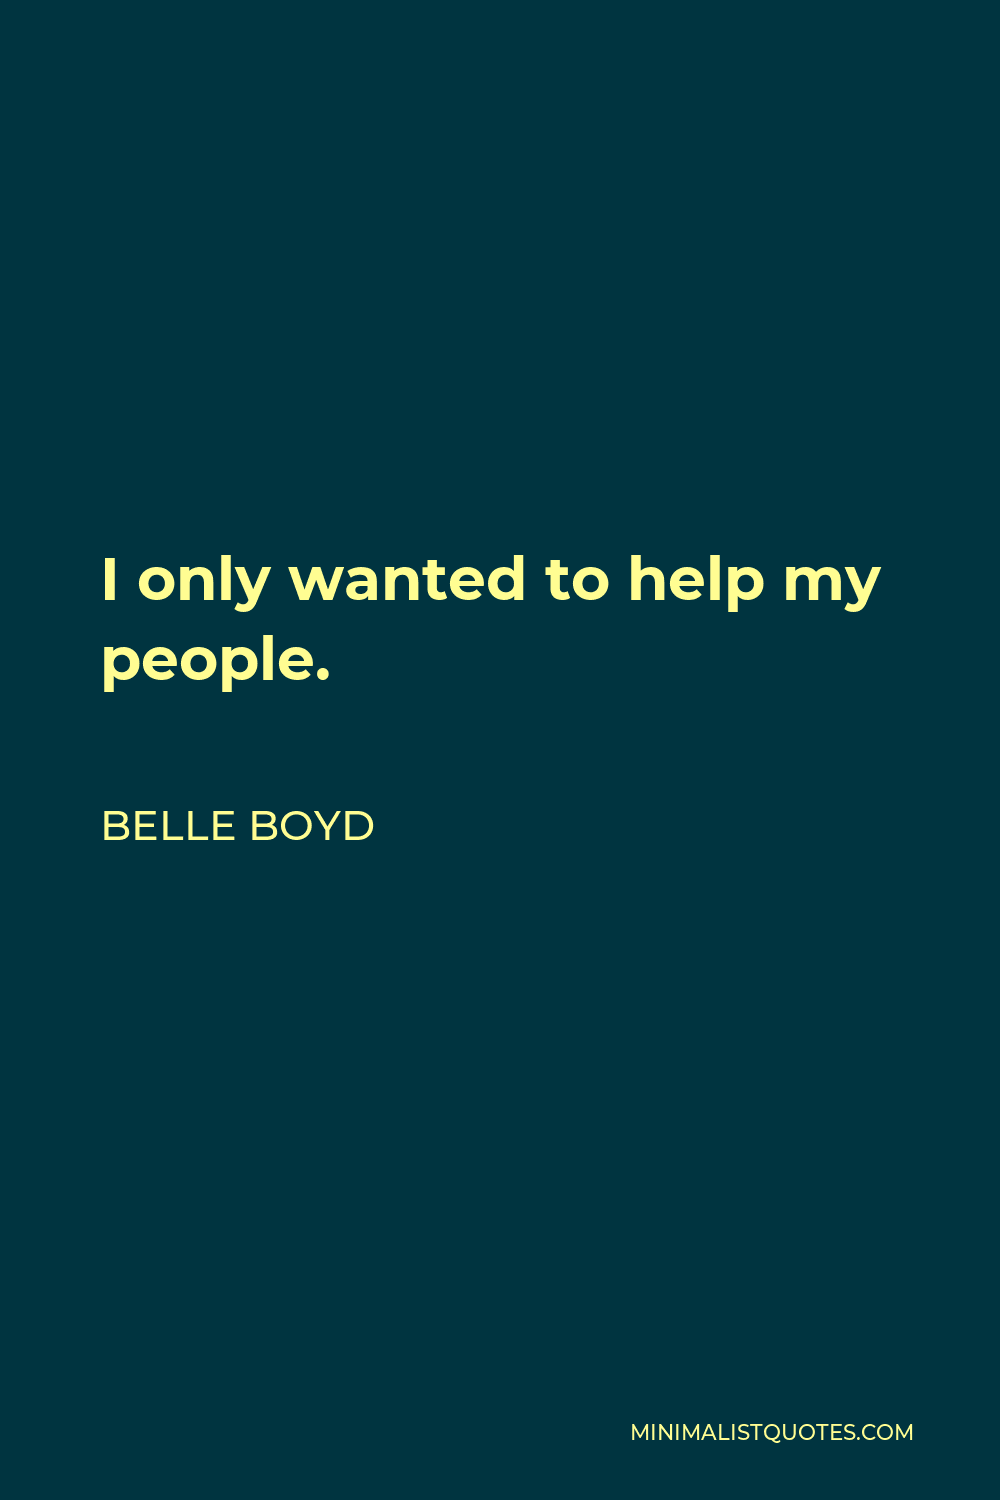 Belle Boyd Quote - I only wanted to help my people.